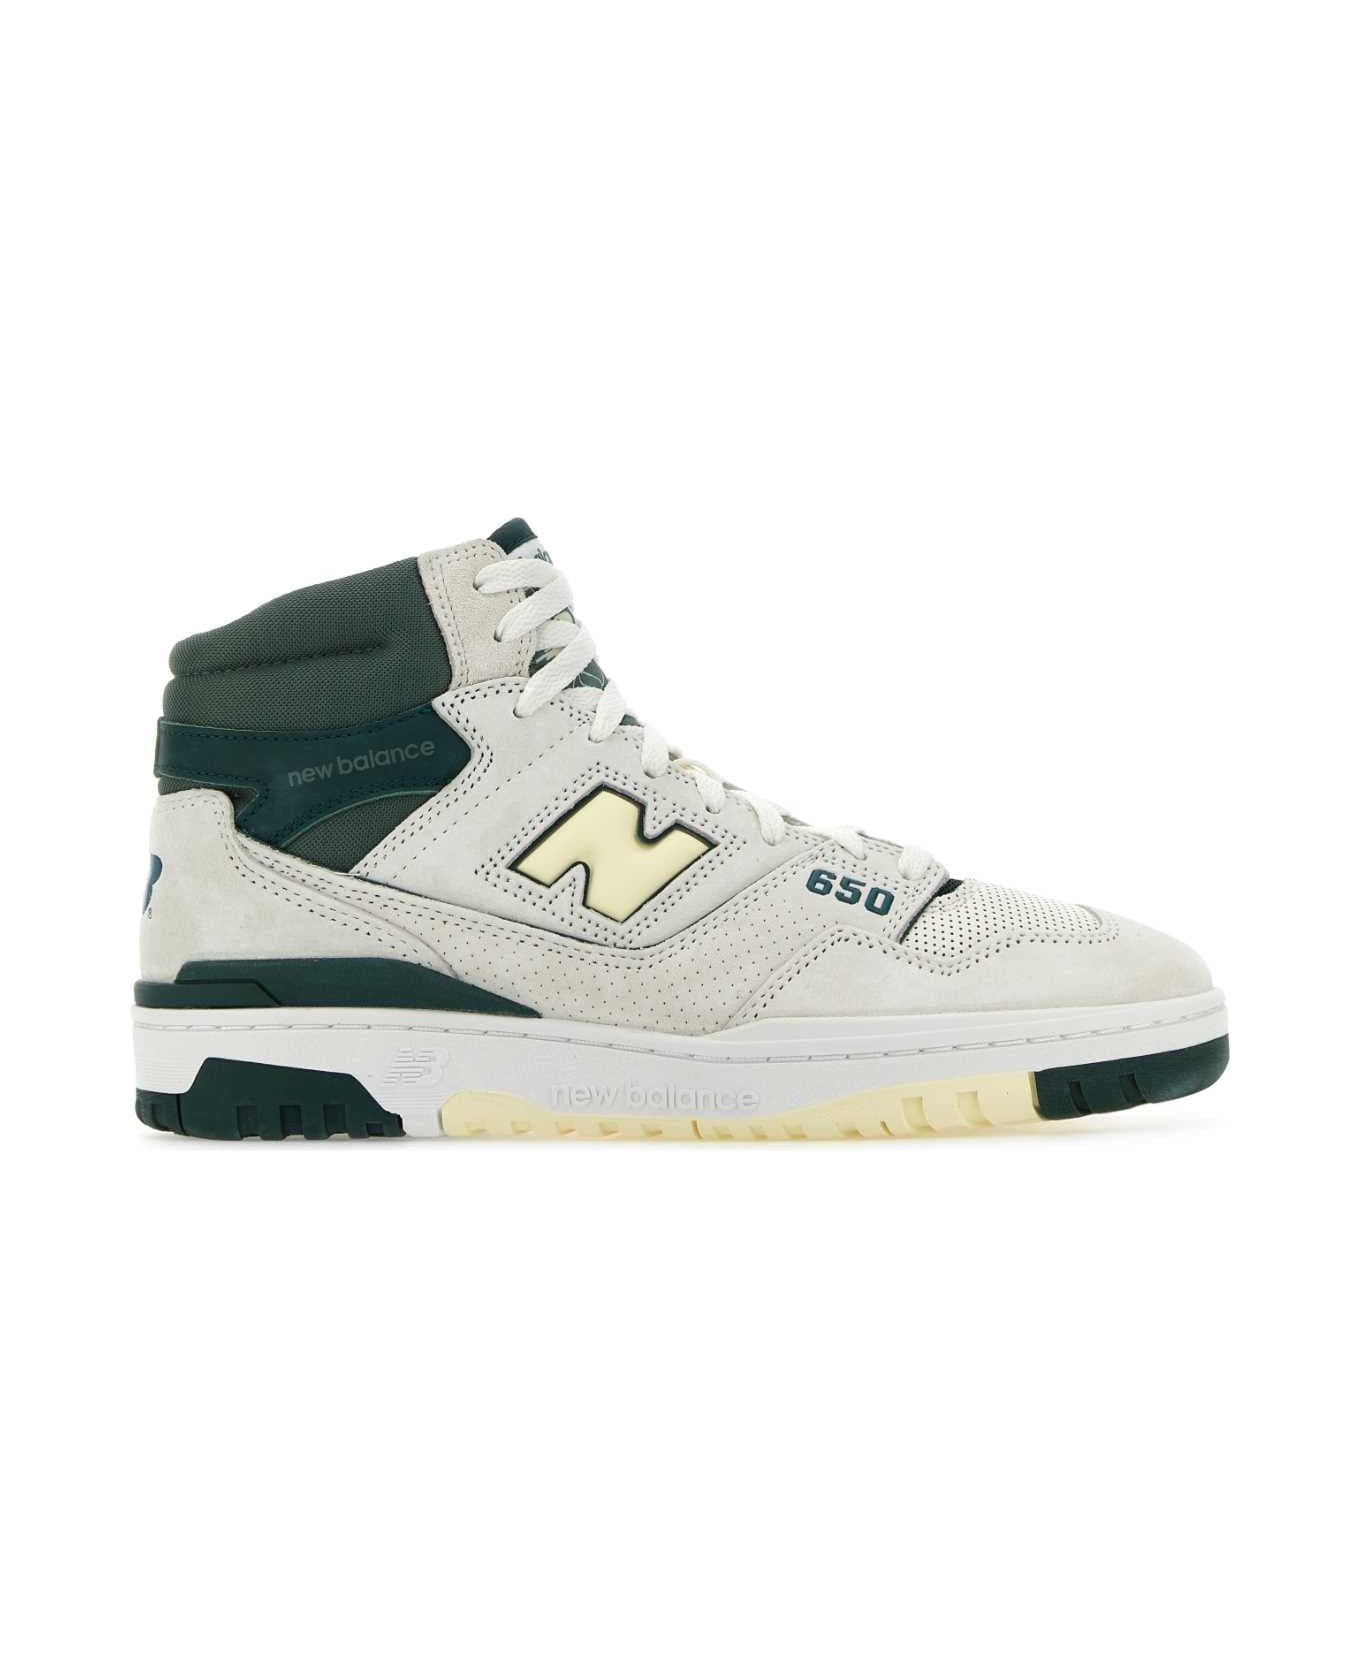 New Balance Multicolor Leather And Suede 650 Sneakers - GREENWHITE スニーカー